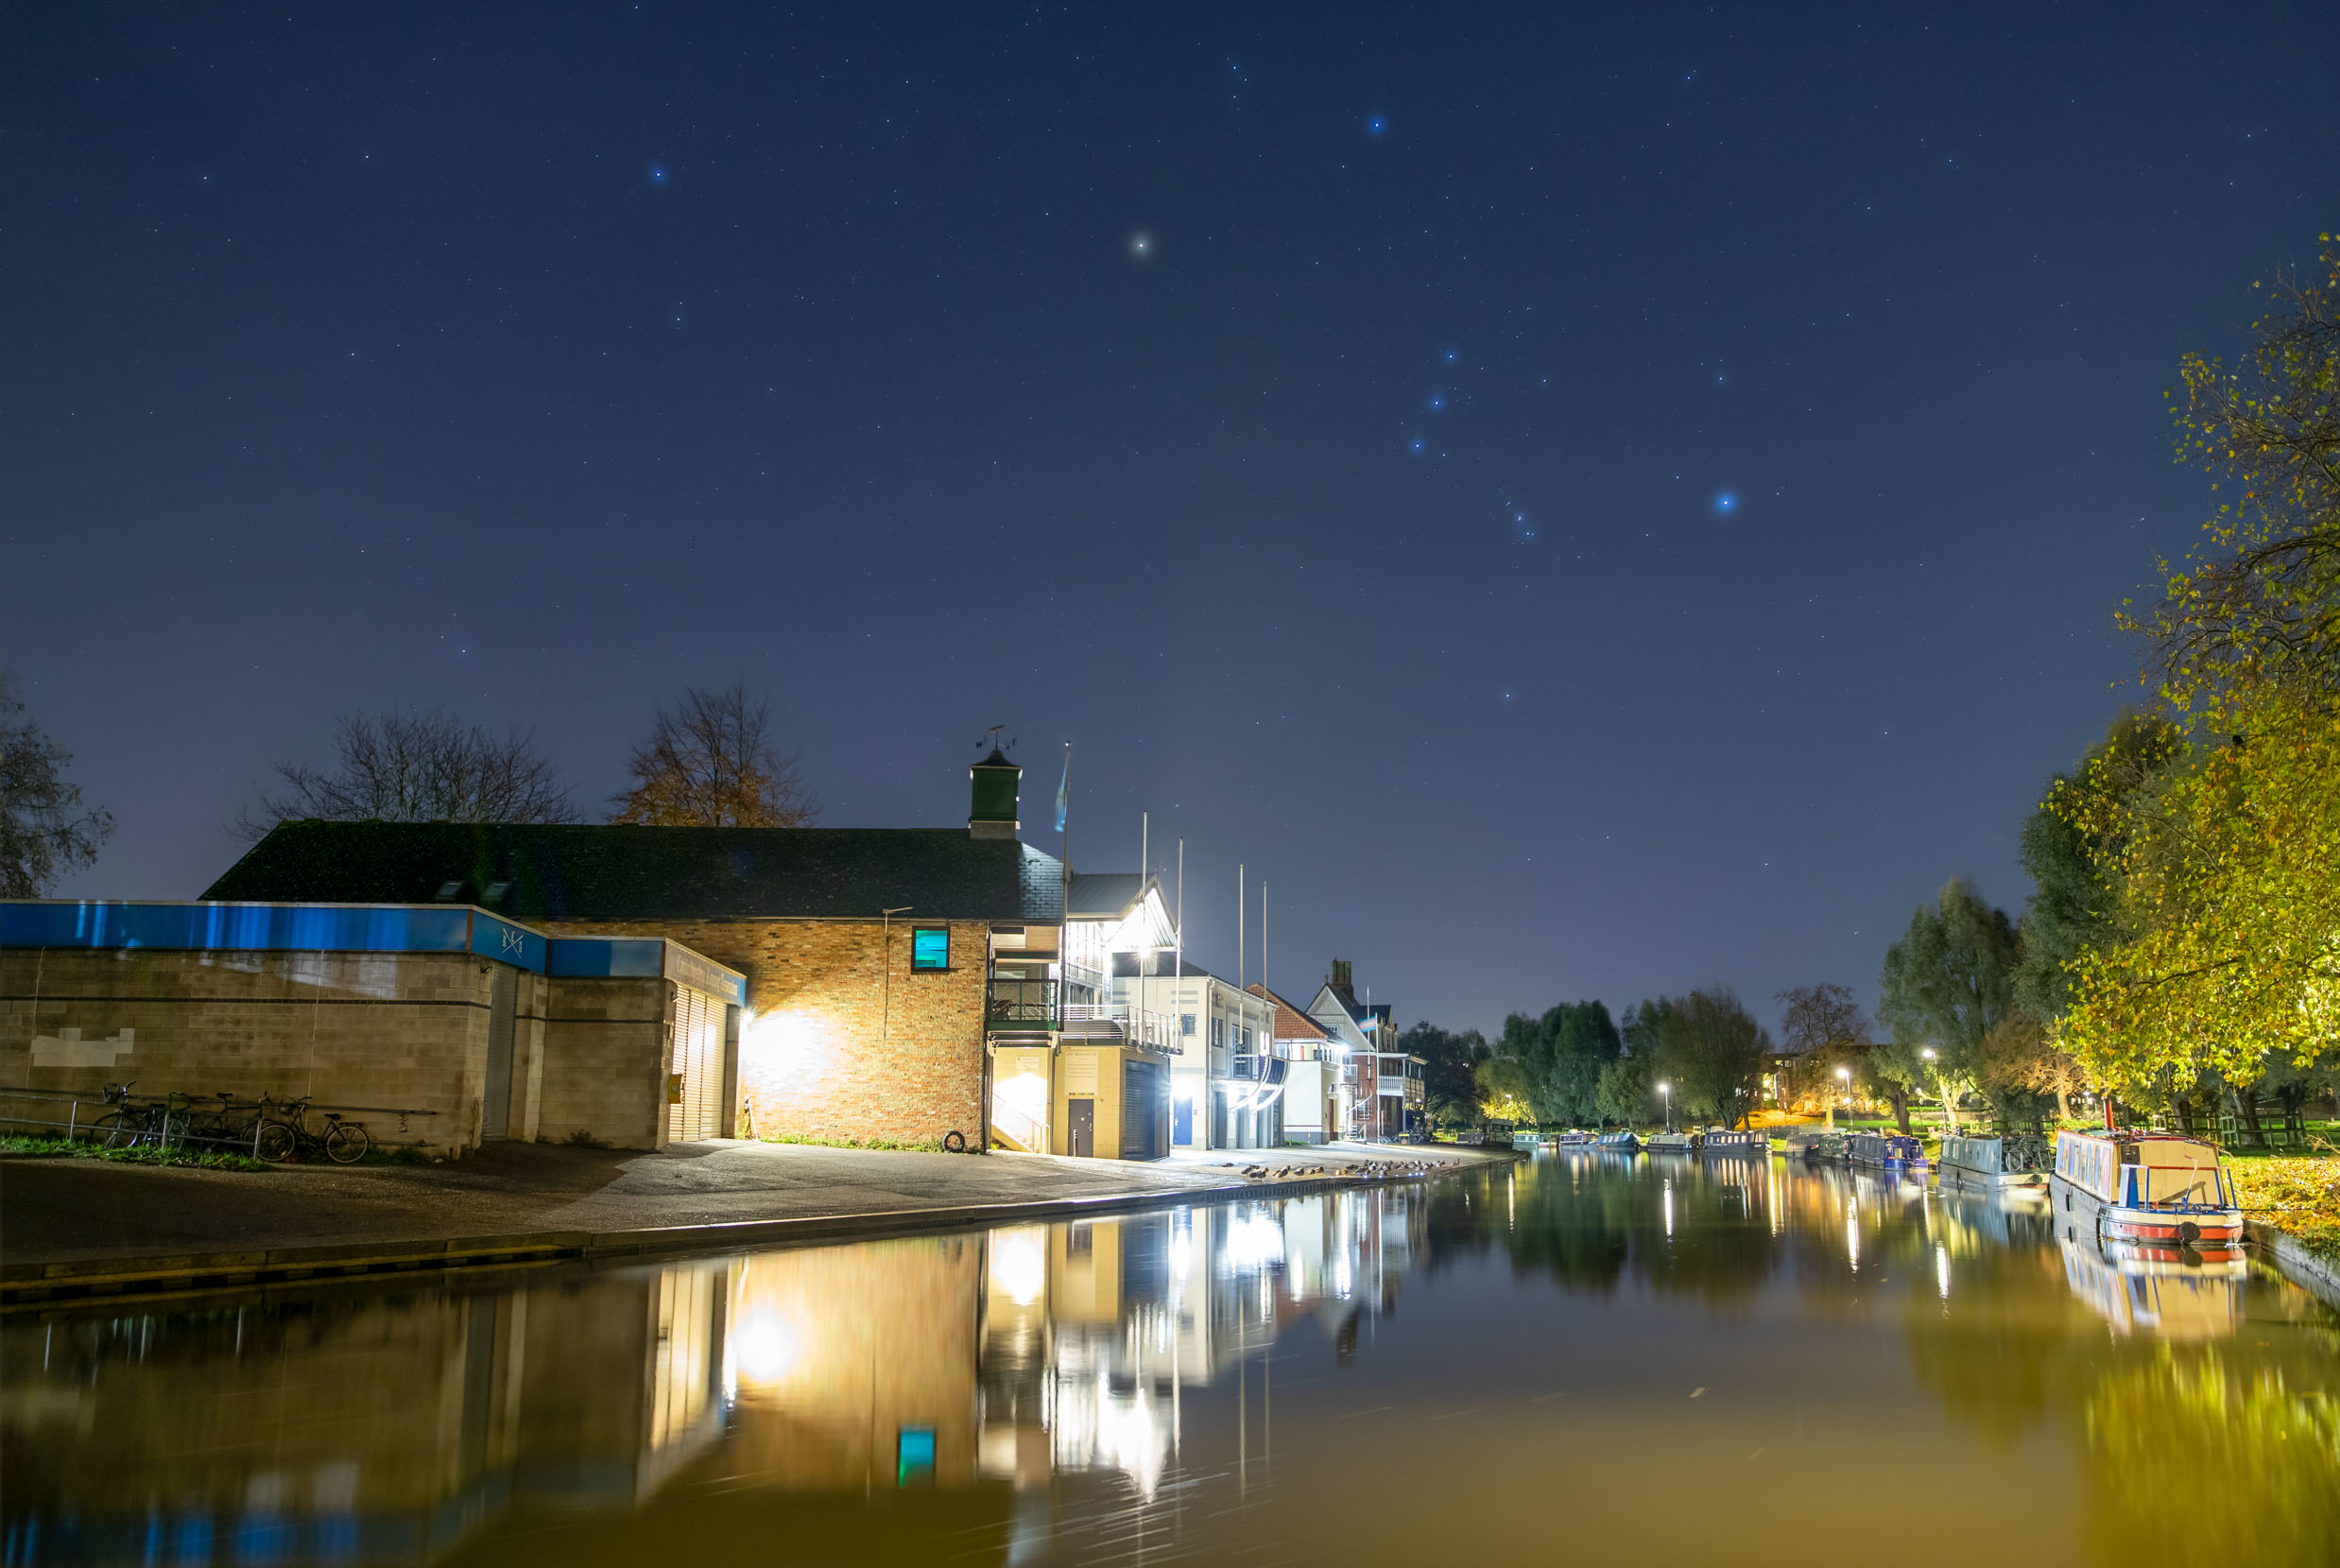 The last photo from my first night using my starglow filter, November 2022. The lights from the boathouses was unfortunately quite bright.